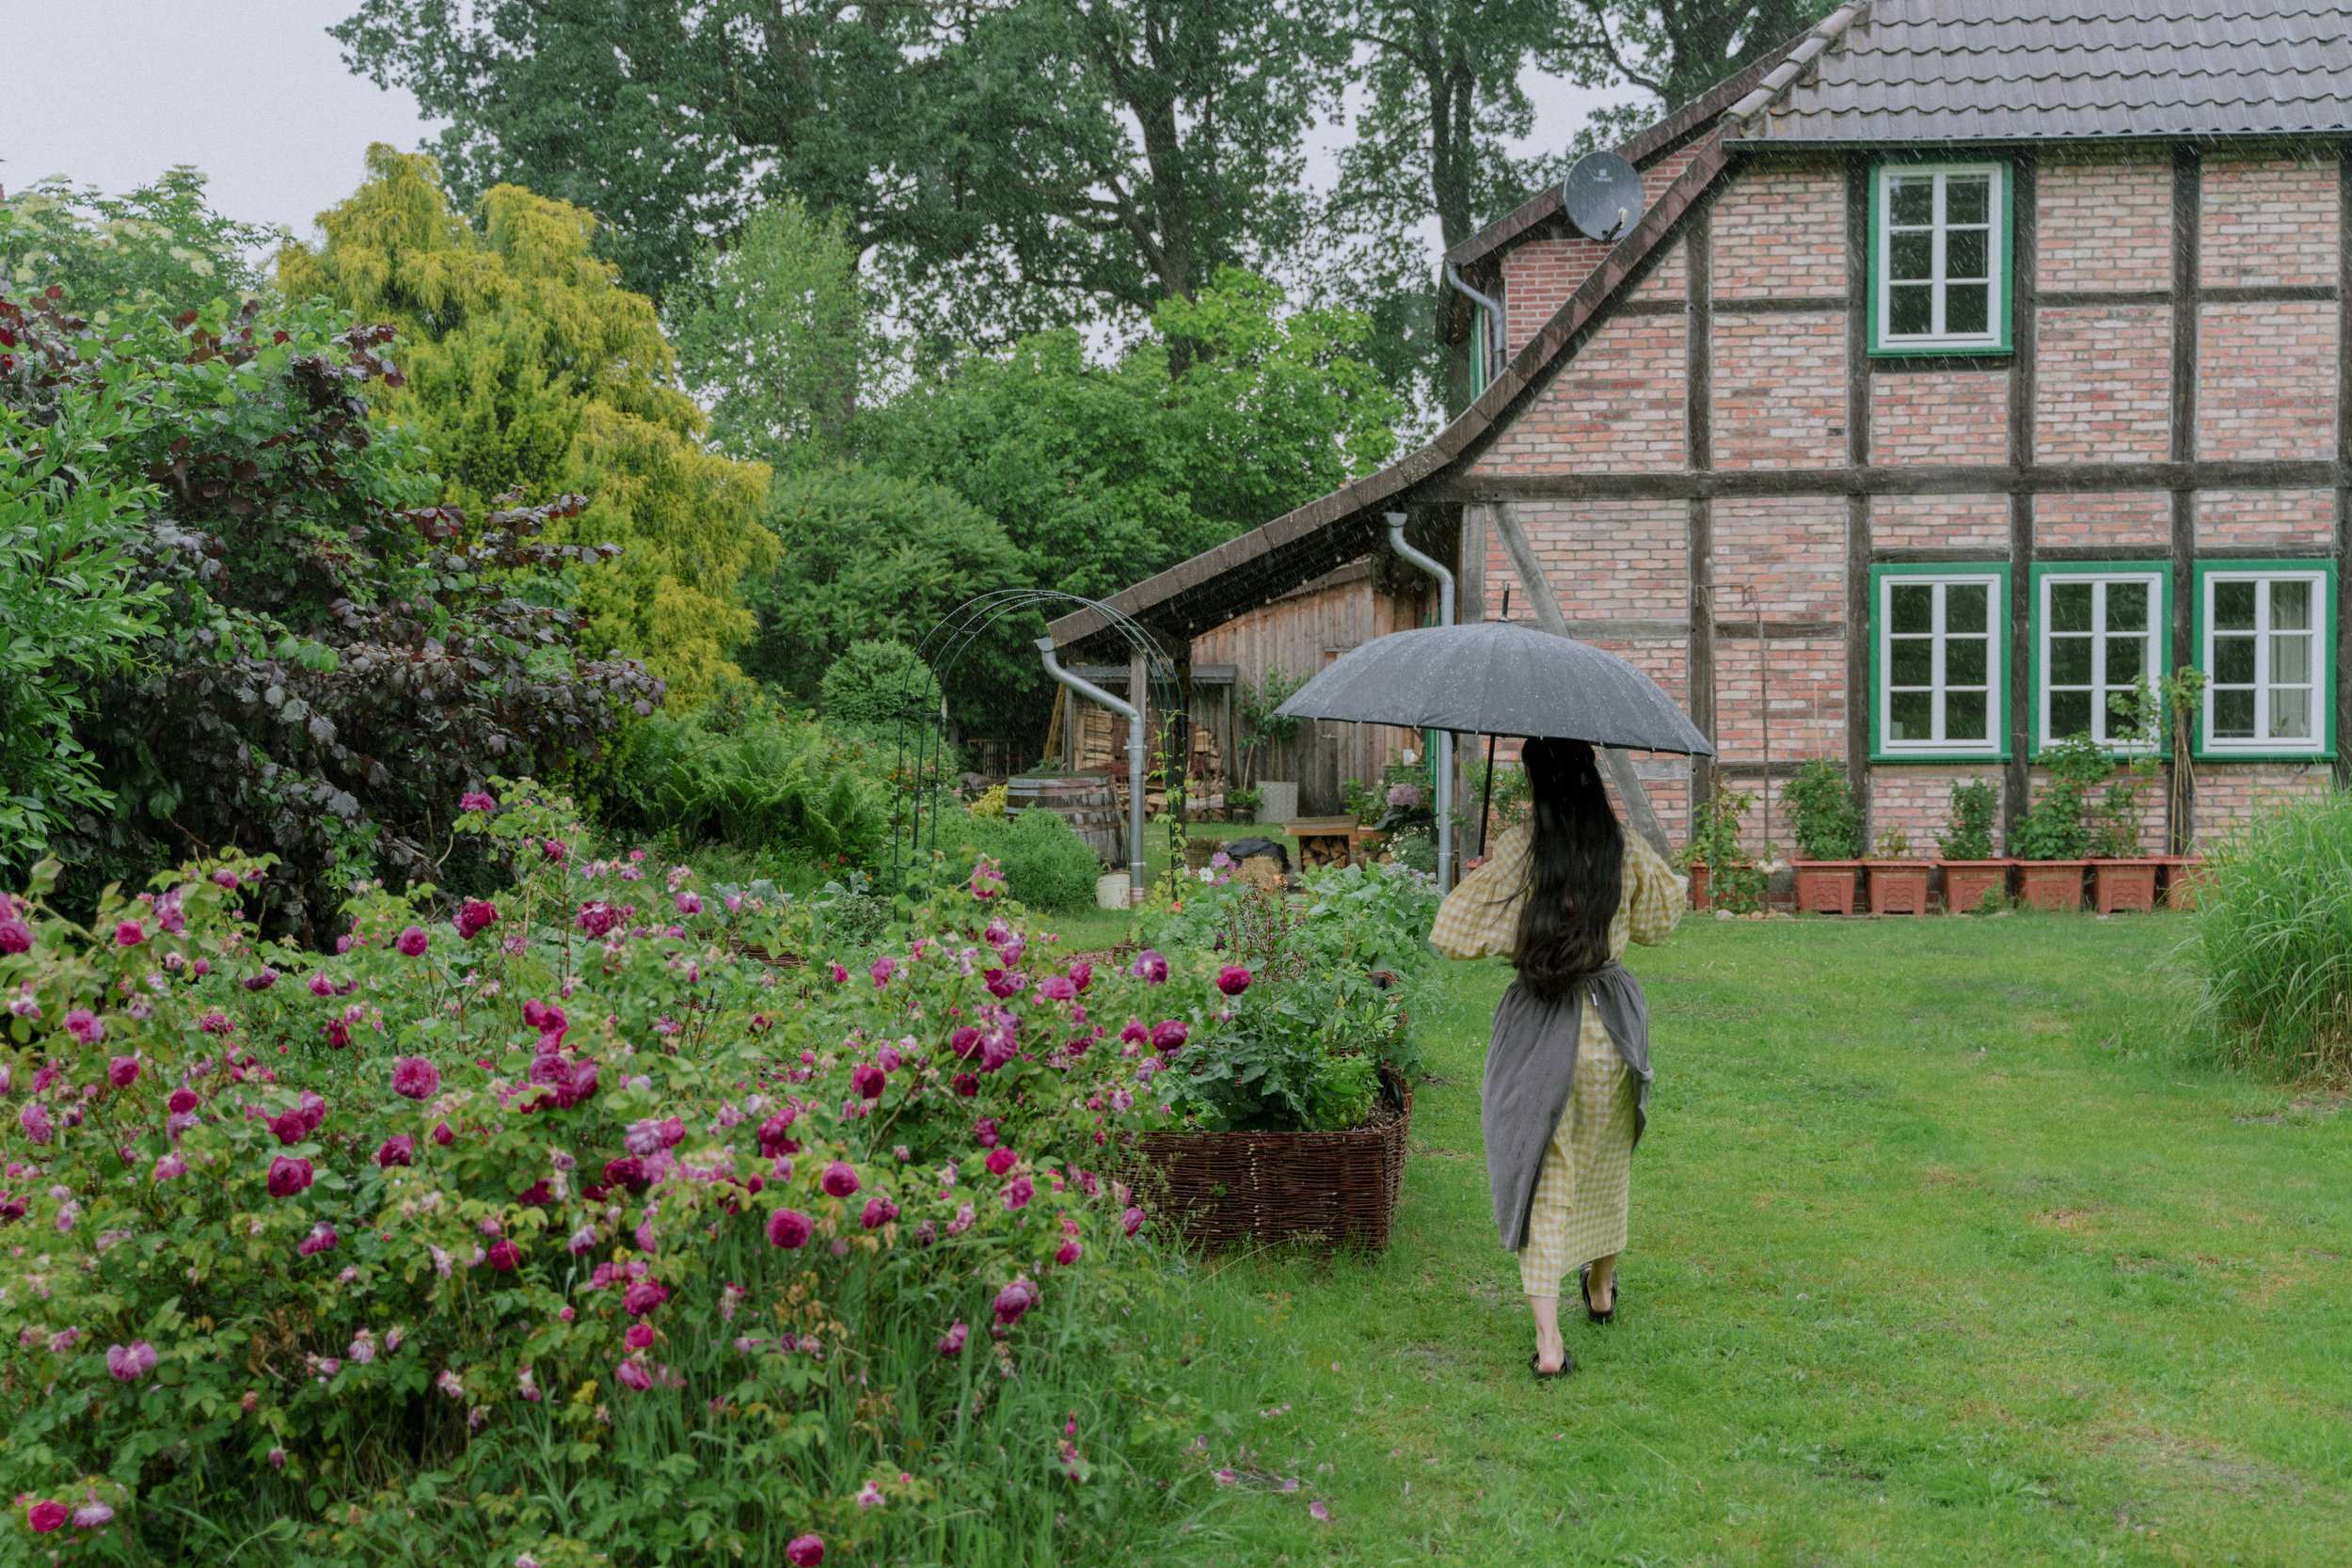 Daily life in my countryside. The Rainy Day. Summer Life in the countryside. Emma how the Gardens meet. Me like Life.